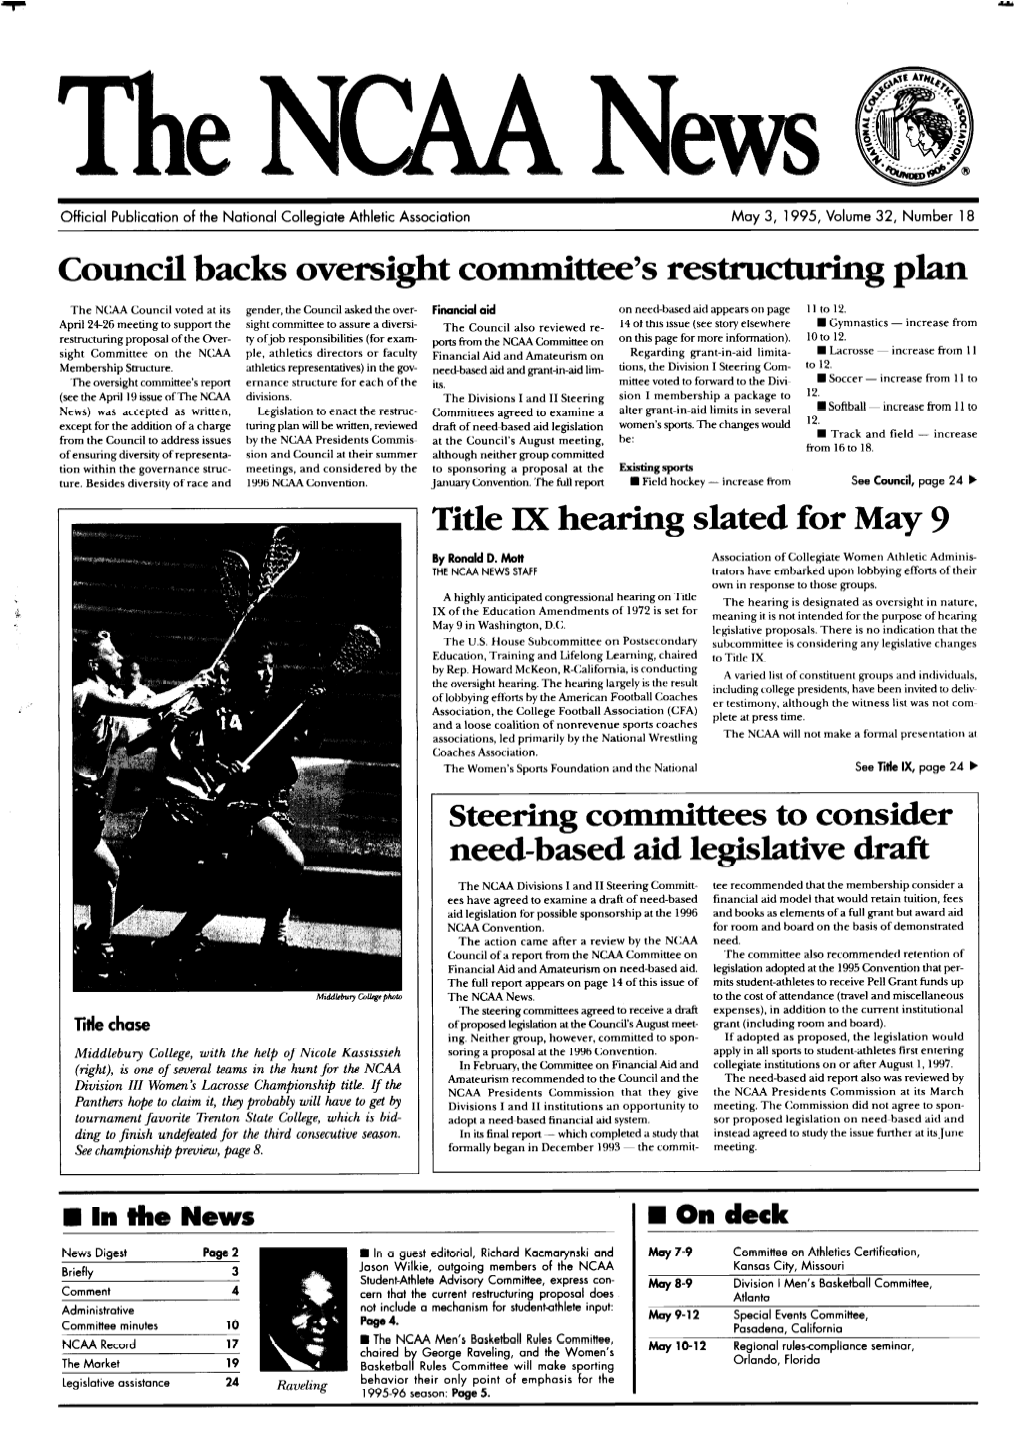 May 3, 1995, Volume 32, Number 18 Council Backs Oversight Committee’S Restructuring Plan